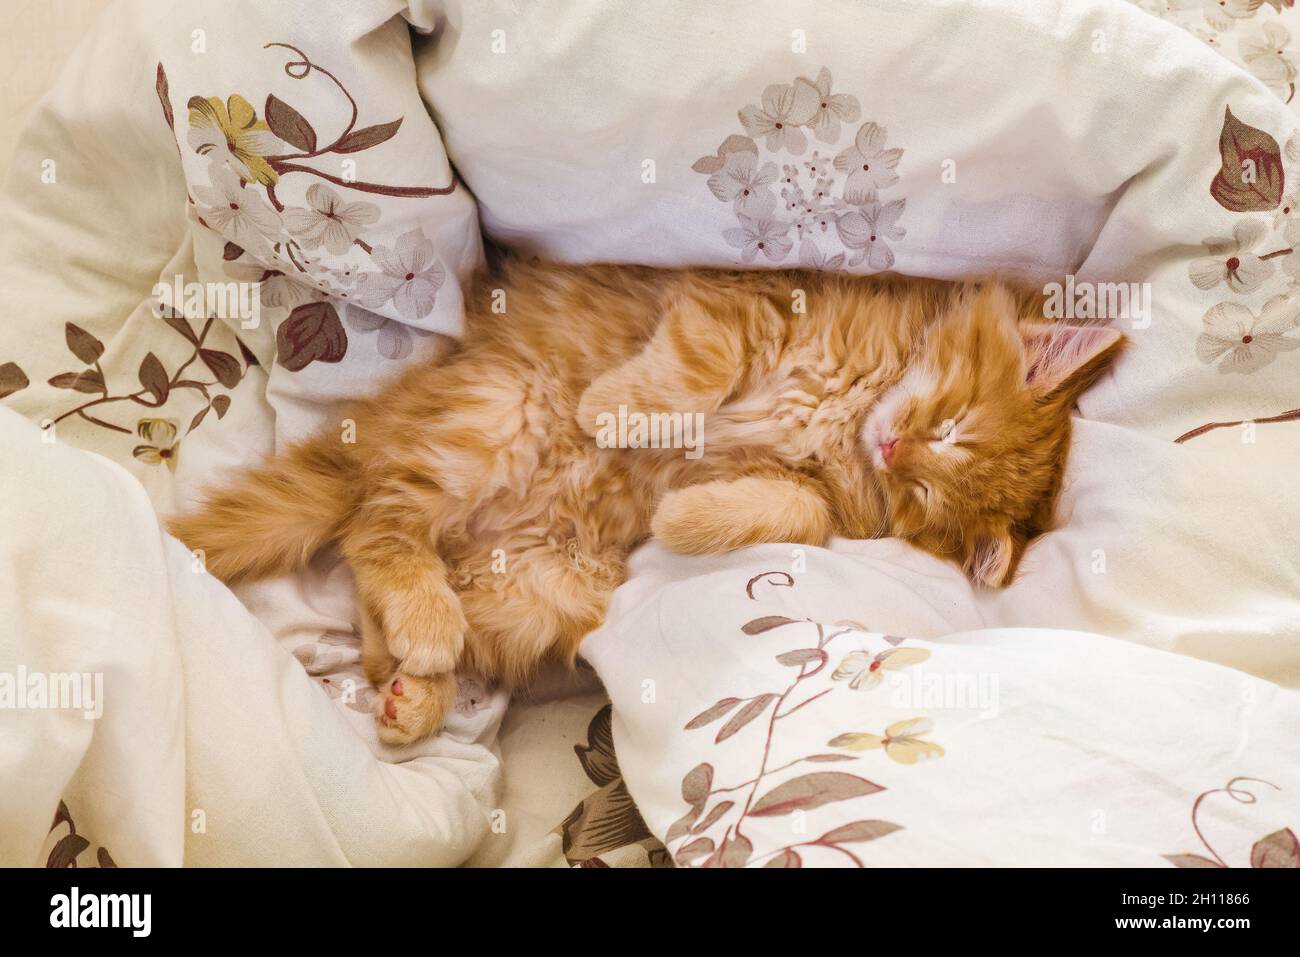 Cute ginger baby cat sleeping on white bed clothes.Domestic animal. Baby cat sleeping in bed. Sleep and cozy nap time. Home pet. Young kitten. Stock Photo